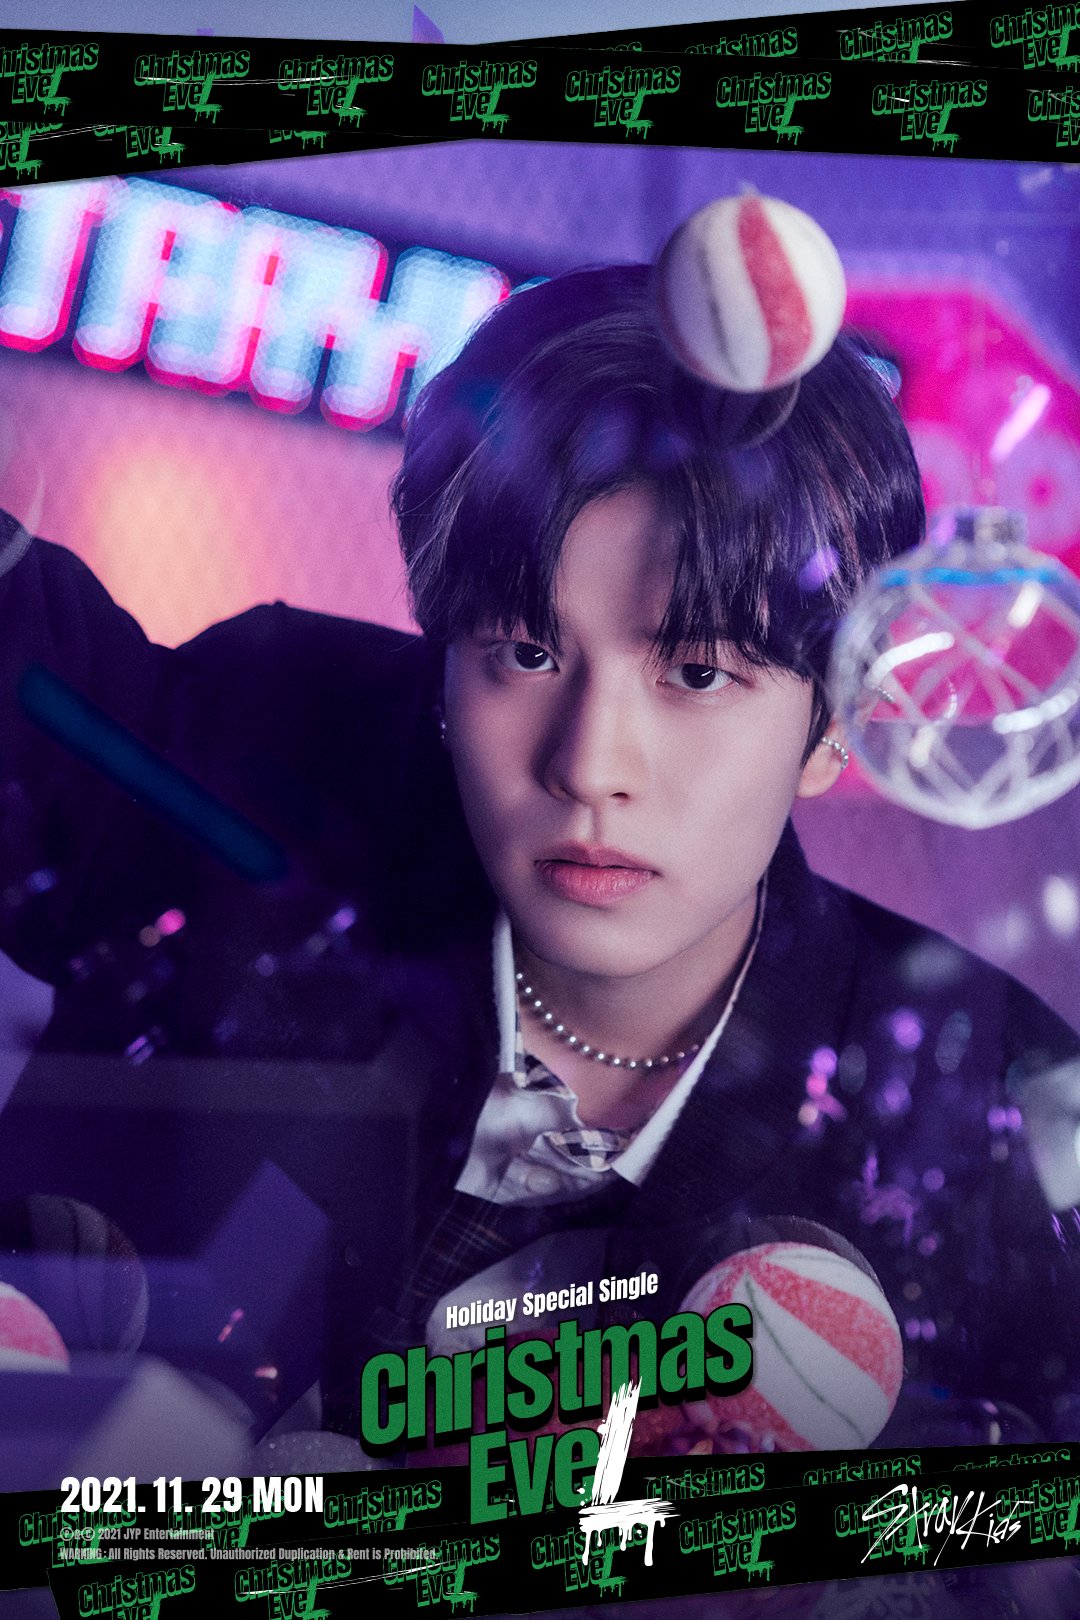 Stray Kids Seungmin Holiday Special Single 'Chistmas EveL' teaser photo